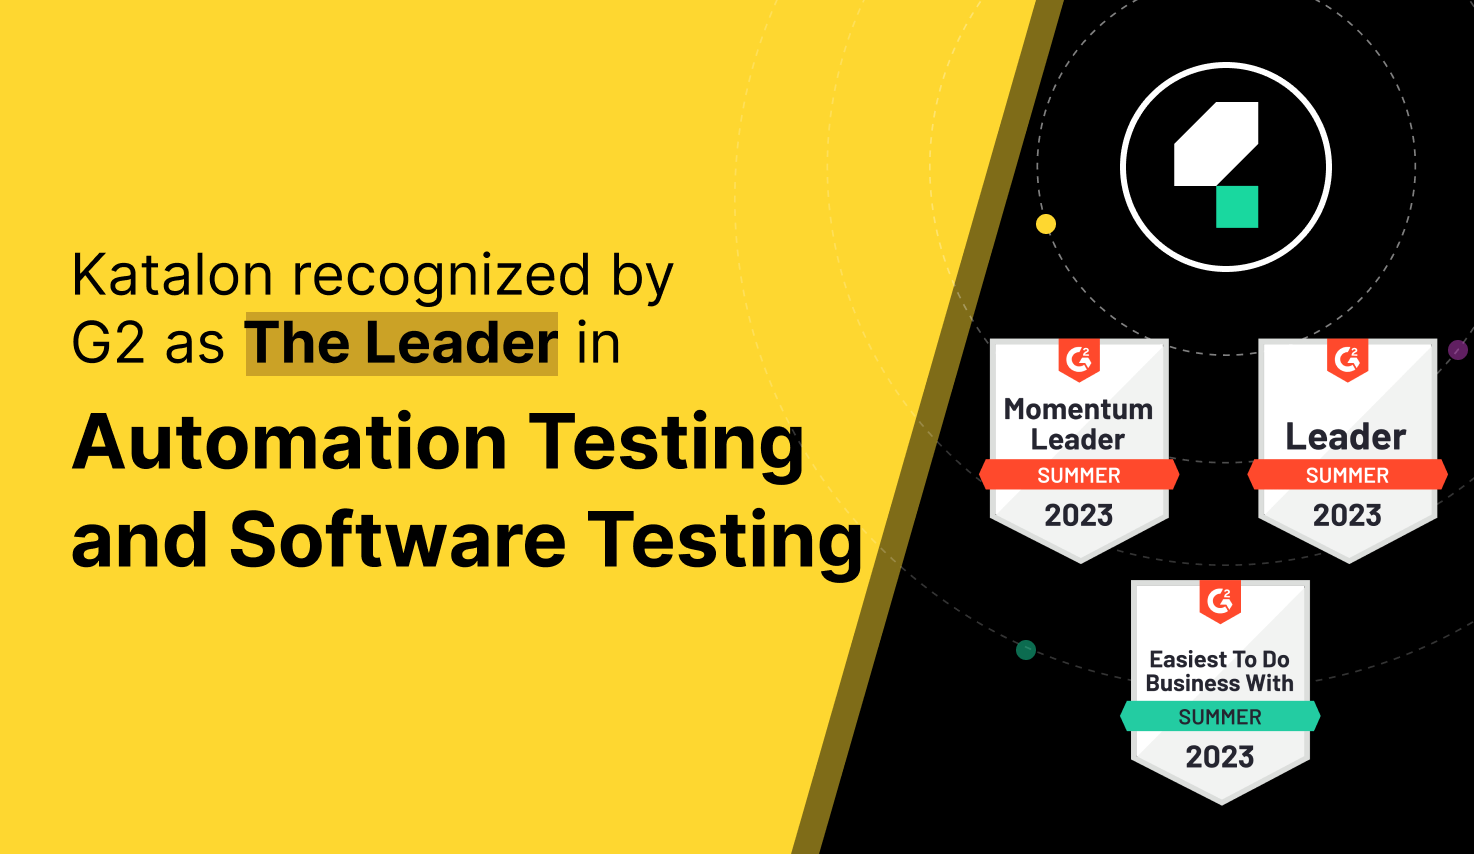 Katalon recognized by G2 as The Leader in Automation Testing and Software Testing